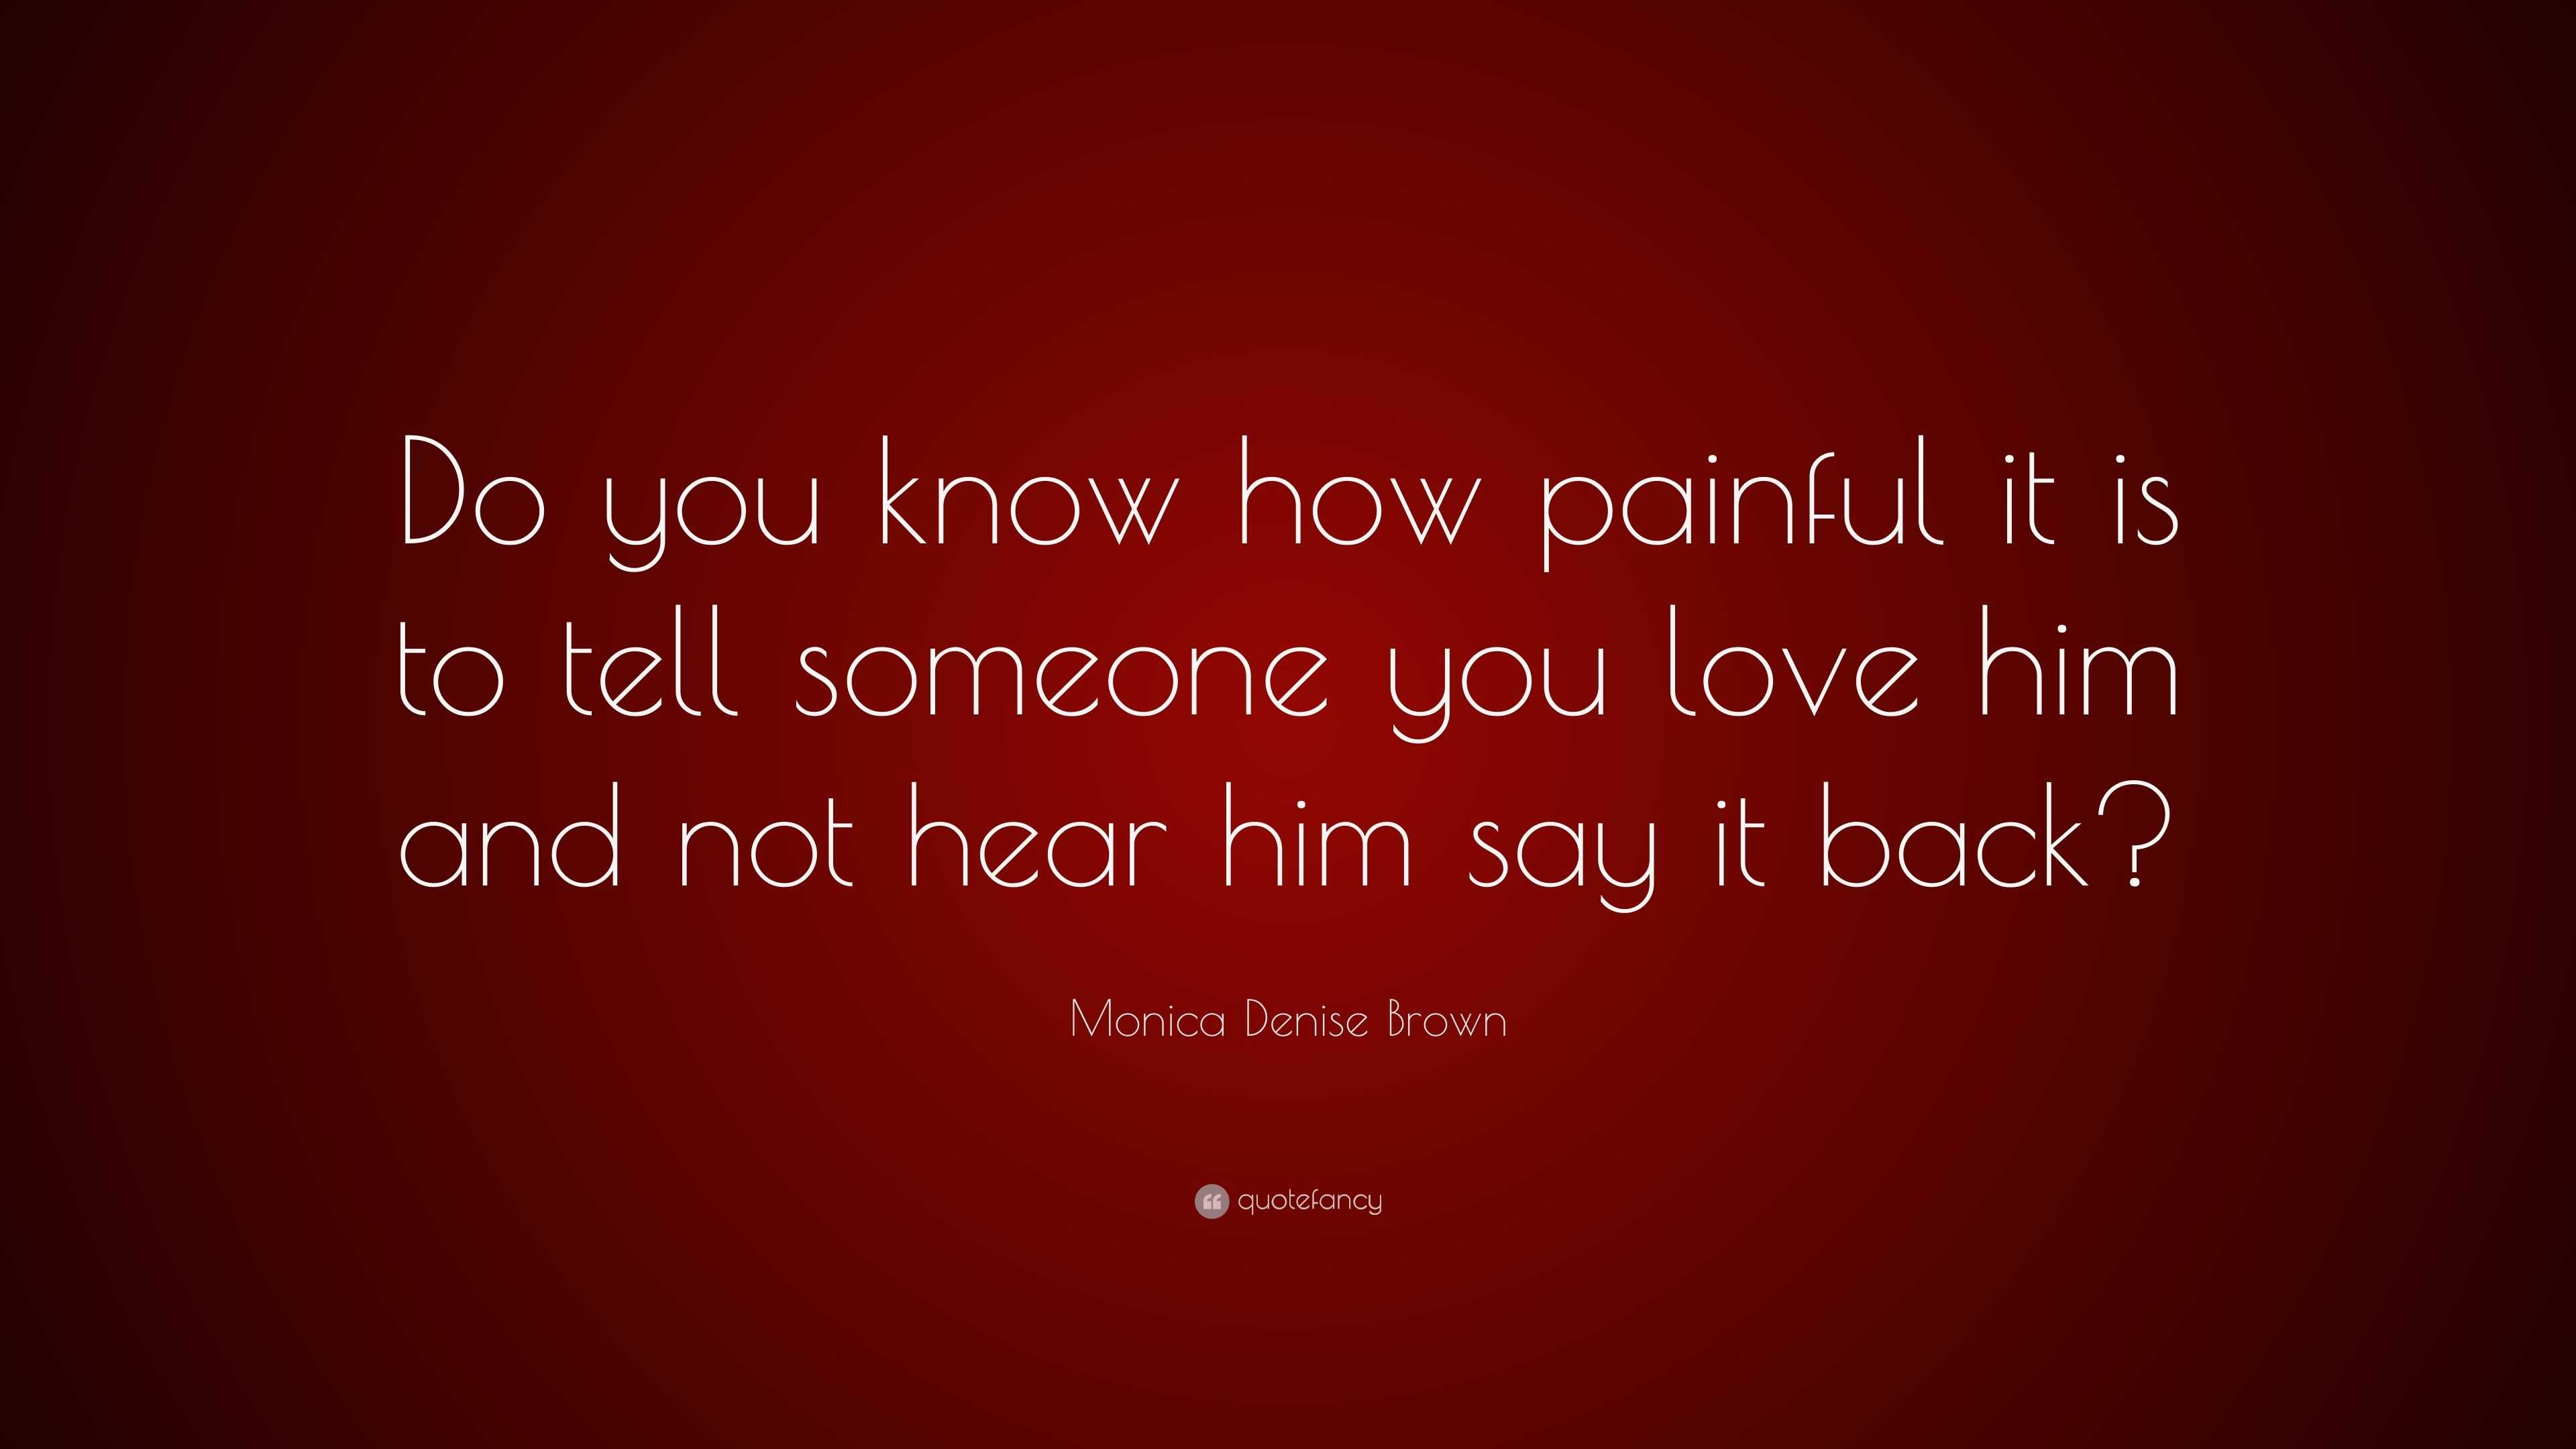 Monica Denise Brown Quote “Do you know how painful it is to tell someone